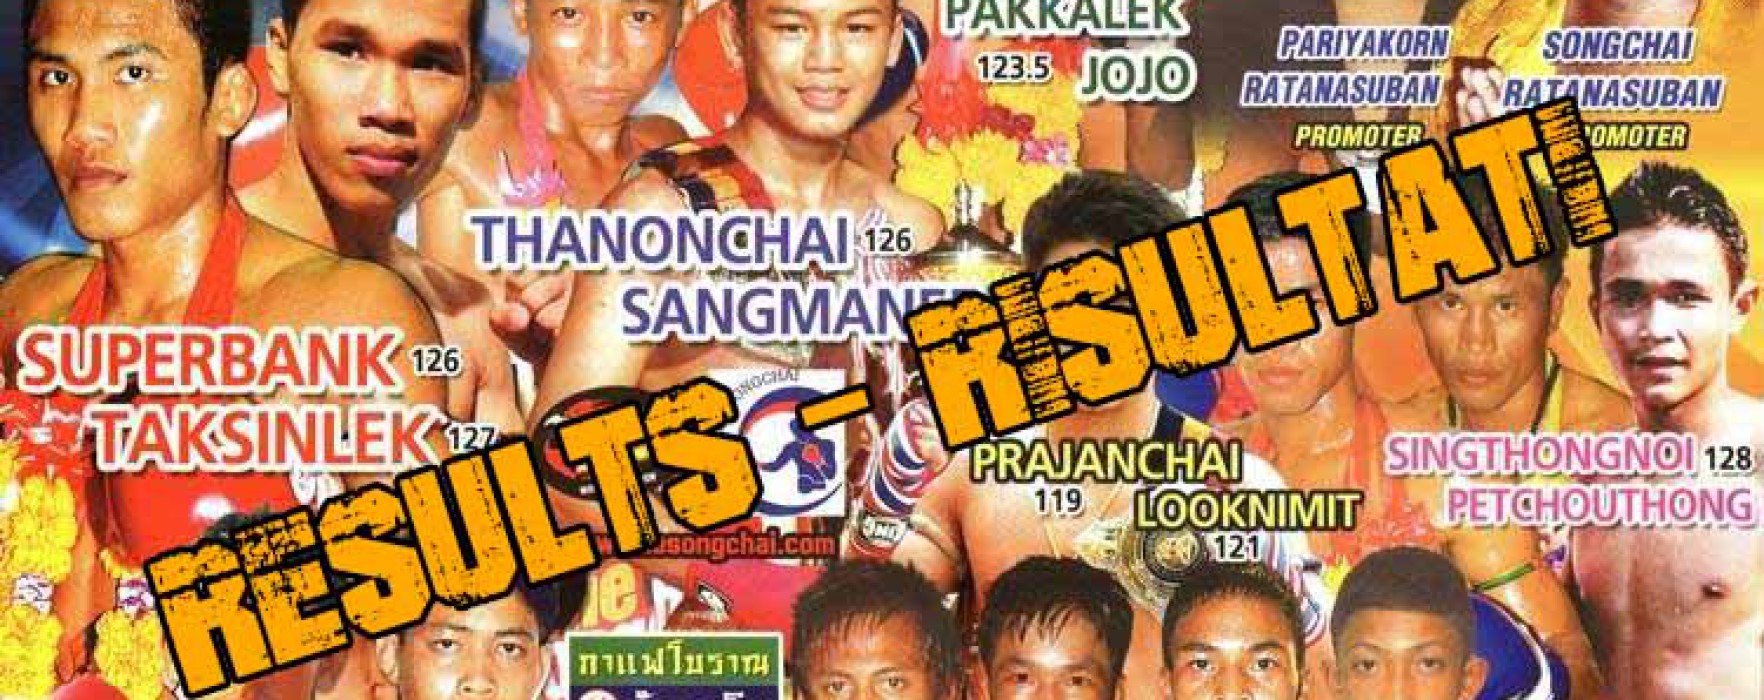 Live results: Rajadamnern Superfight – OneSongchai Promotions – 8th October 2014